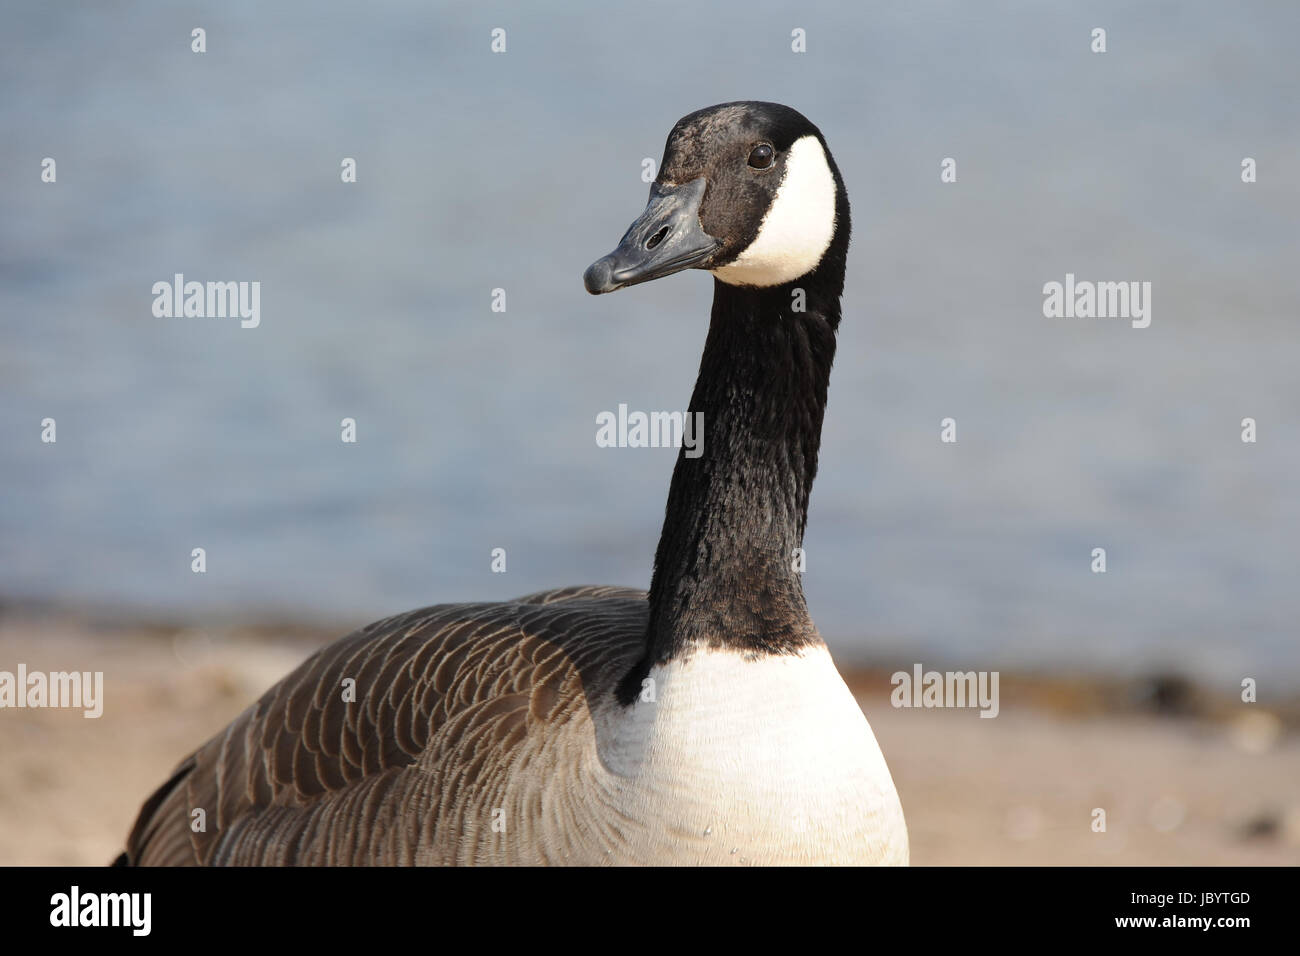 Gans Kanadagans High Resolution Stock Photography and Images - Alamy